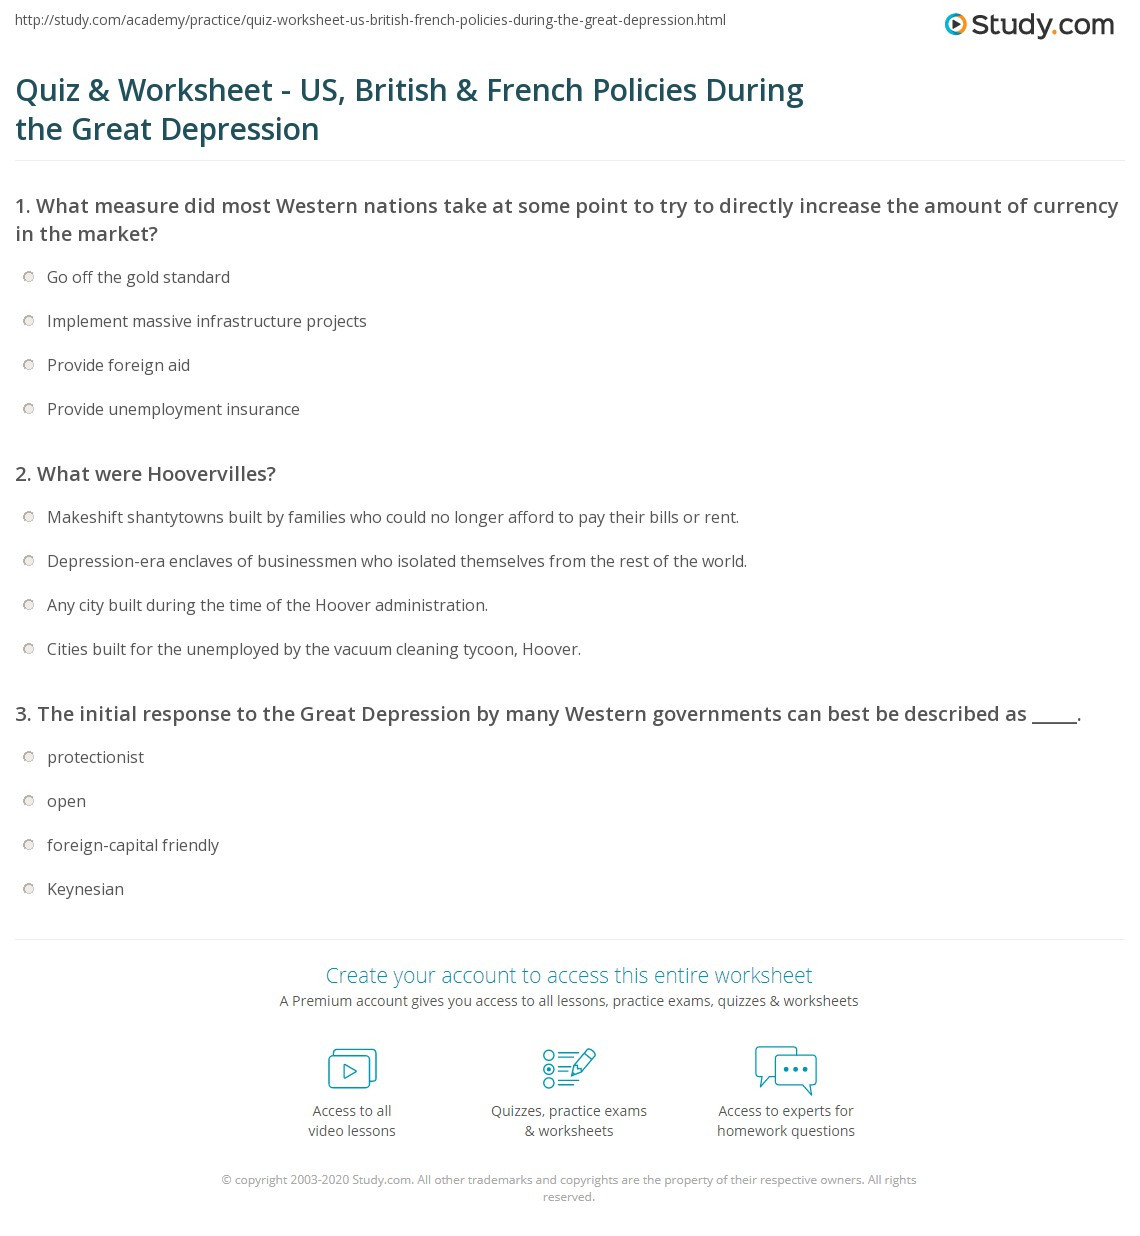 The Great Depression Worksheet Quiz &amp; Worksheet Us British &amp; French Policies During the